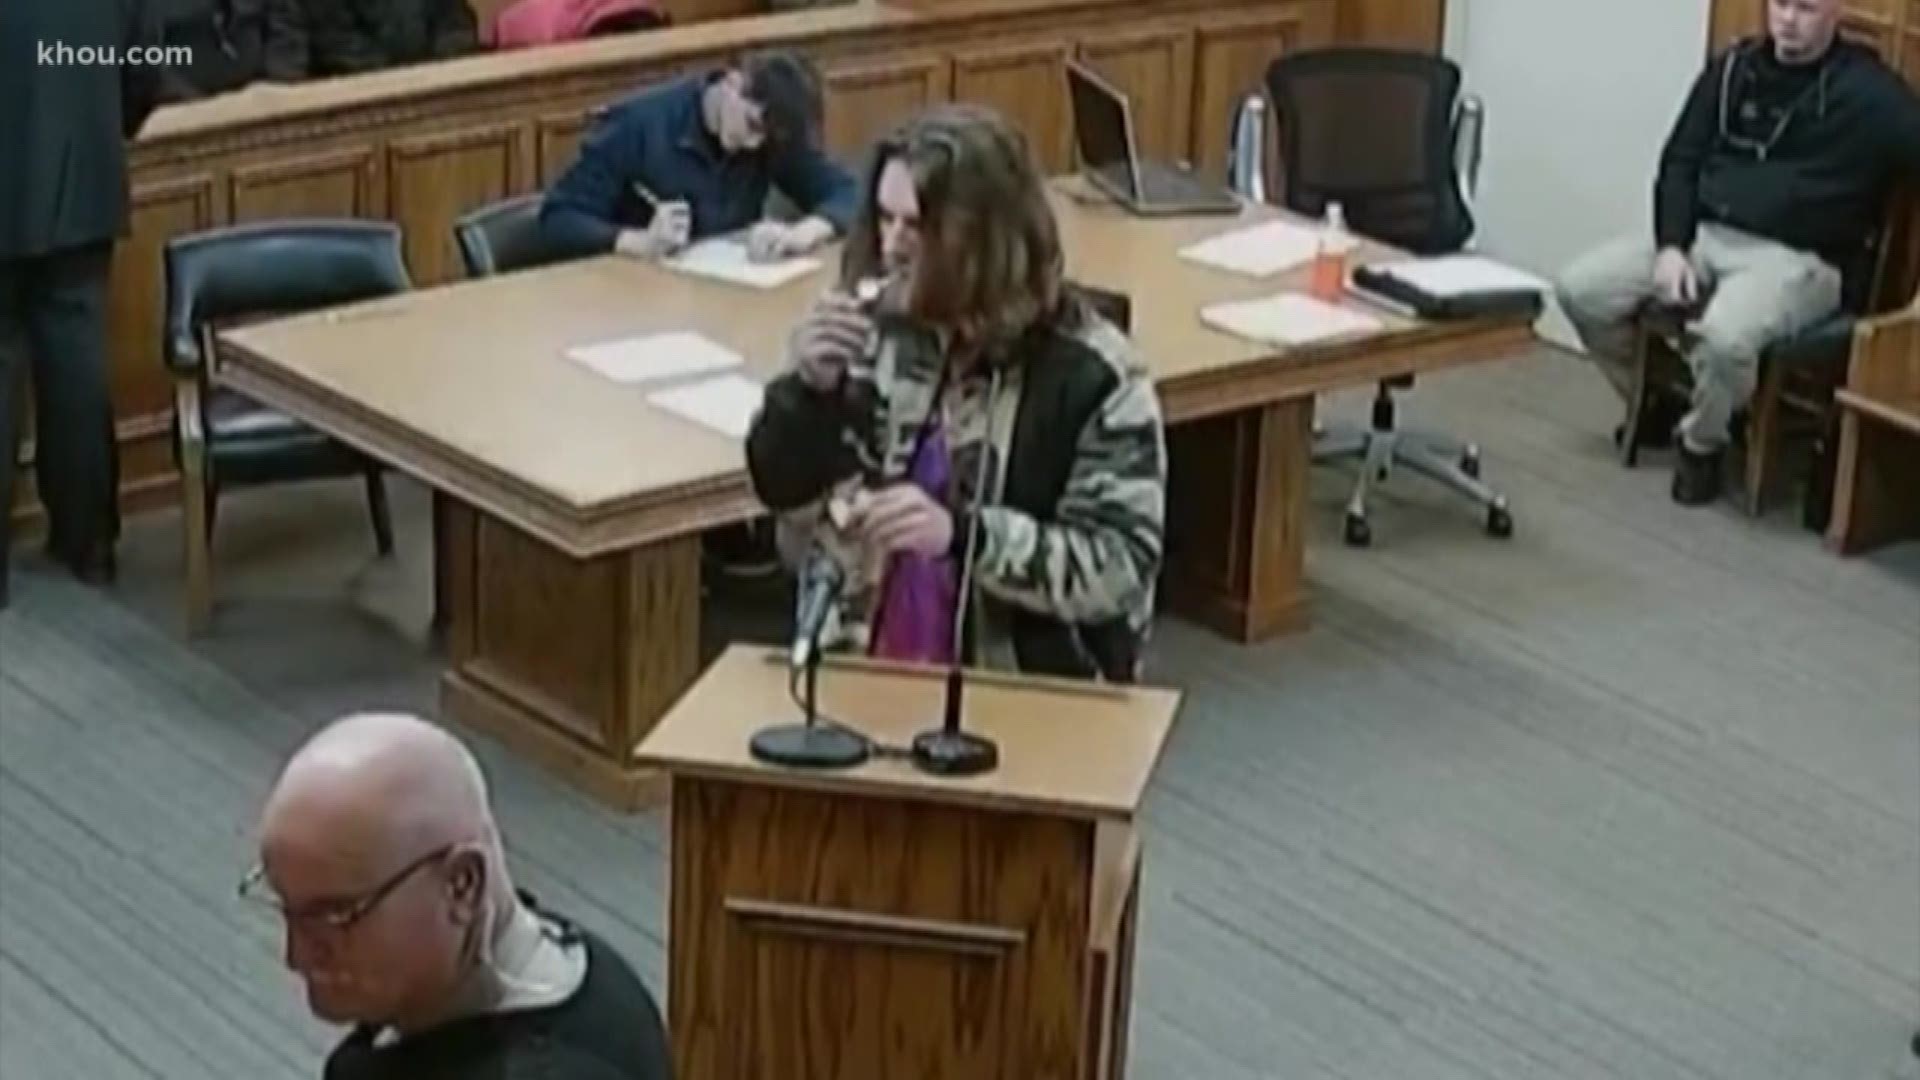 A man lit up a marijuana joint while in court. The man, Spencer Alan Boston, was facing a marijuana possession charge. "One of the craziest things I've seen."